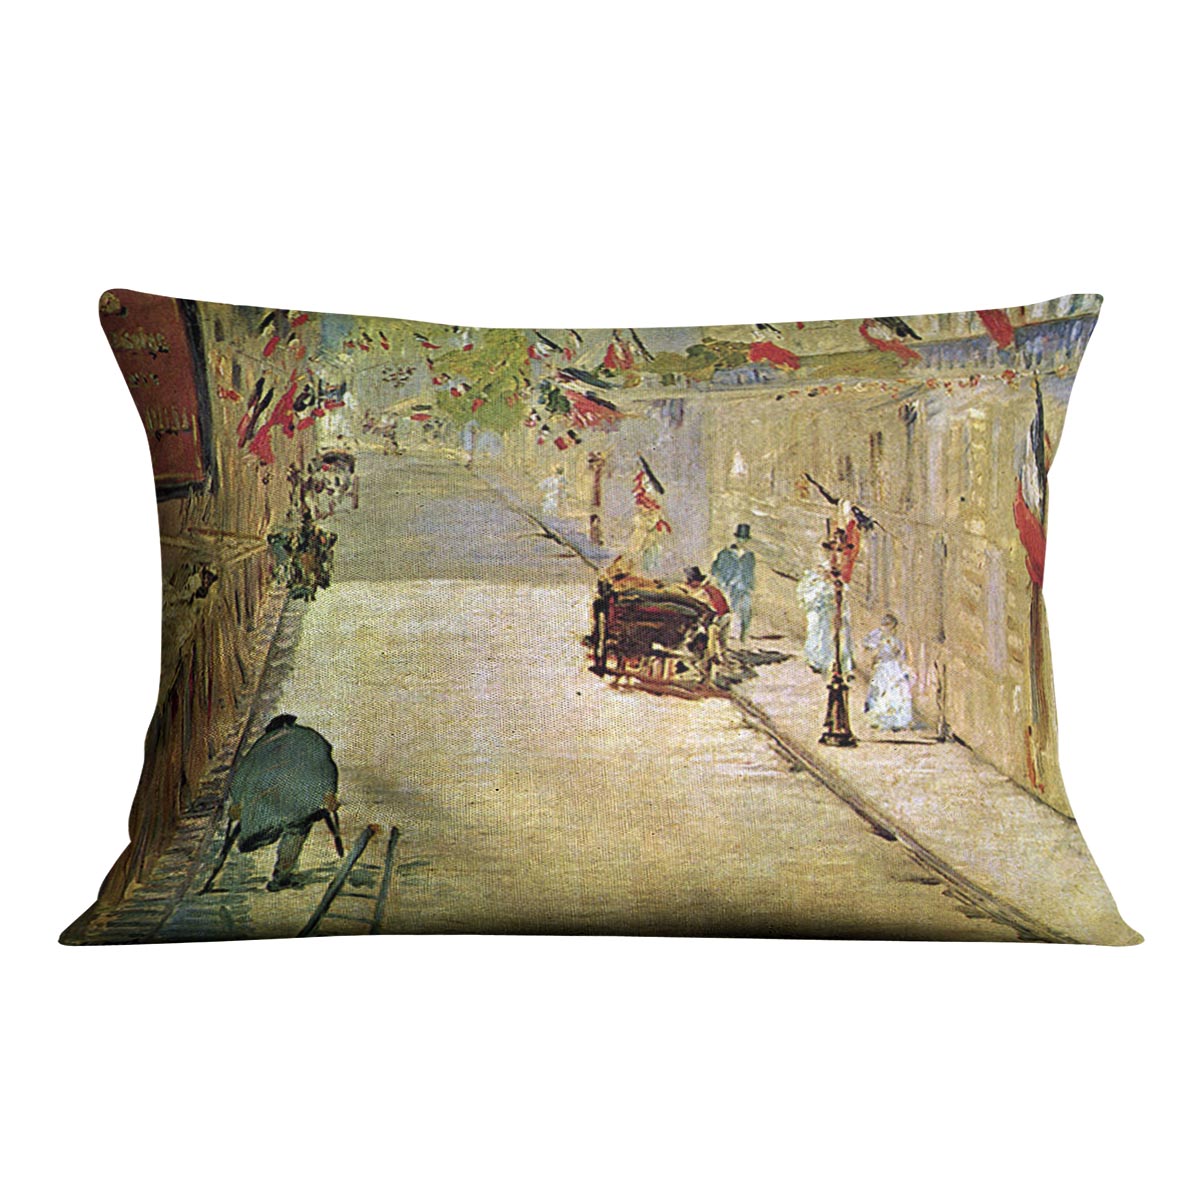 Rue Mosnier with Flags by Manet Cushion